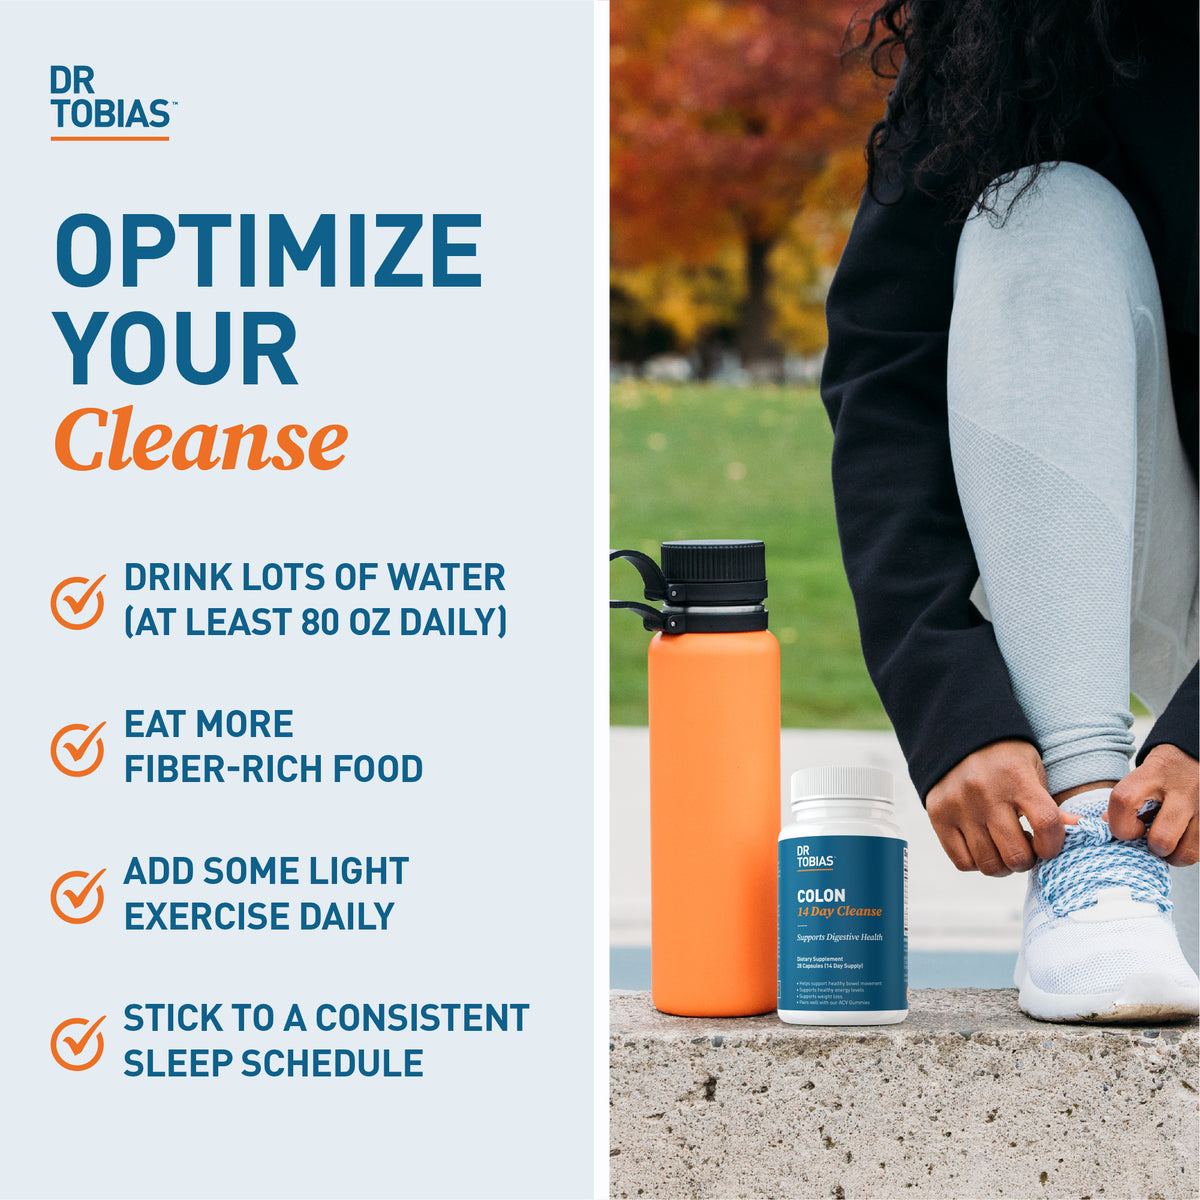 optimize your cleanse by drinking lots of water, eat more fiber, add daily light exercise, stick to a consistent sleep schedule. 